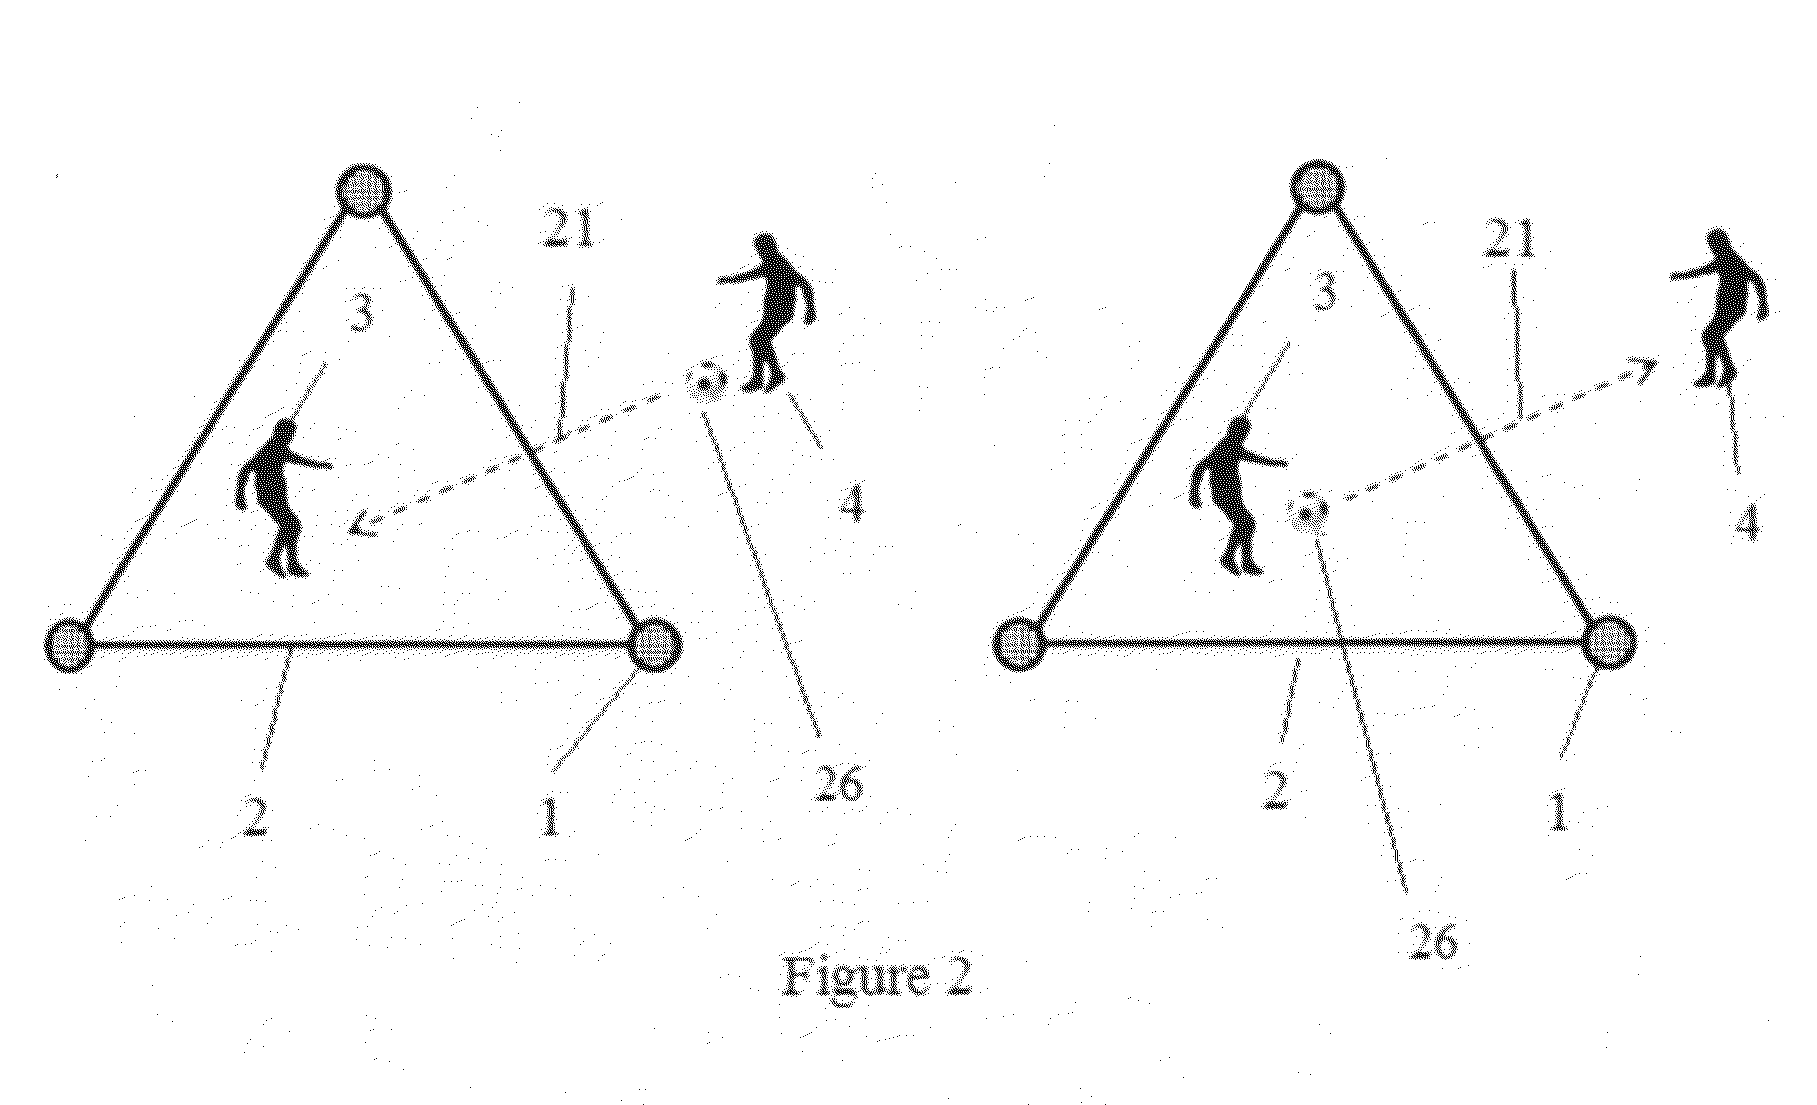 Soccer passing trainer apparatus and games